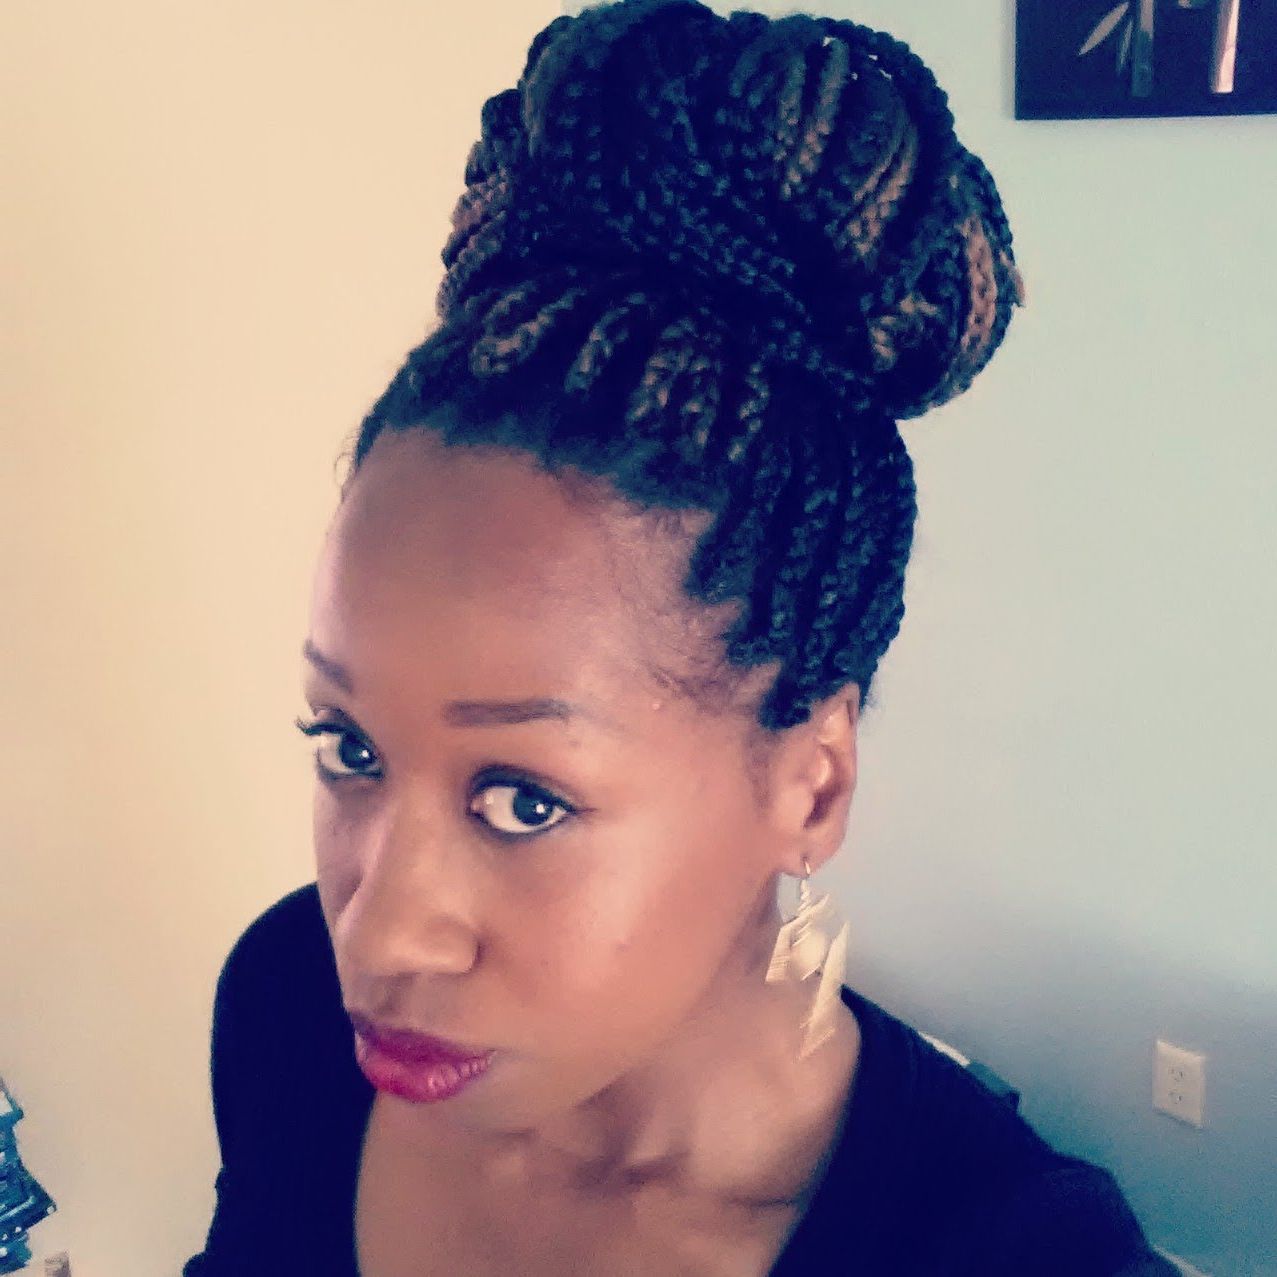 Most Current Bob Braid Hairstyles With A Bun Regarding 30 Top Box Braids Hairstyles For Black Women To Do Yourself (View 16 of 20)